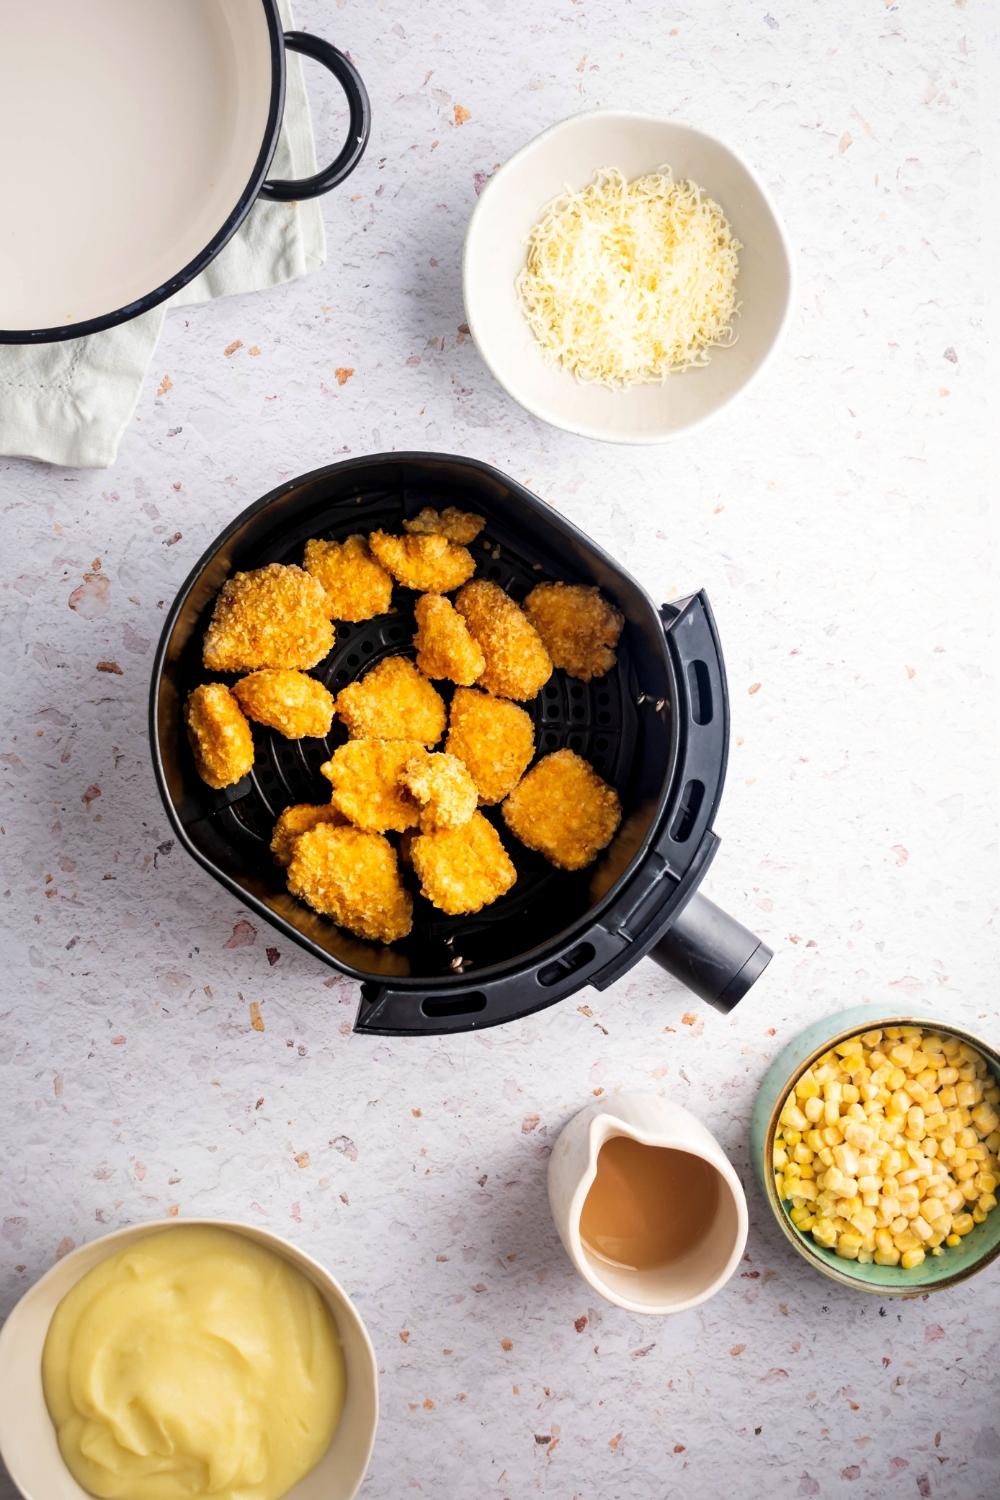 An air fryer filled with popcorn chicken surrounded by a bowl of shredded cheese, a bowl of corn, a picture of gravy, and a bowl of mashed potatoes all on a white counter.